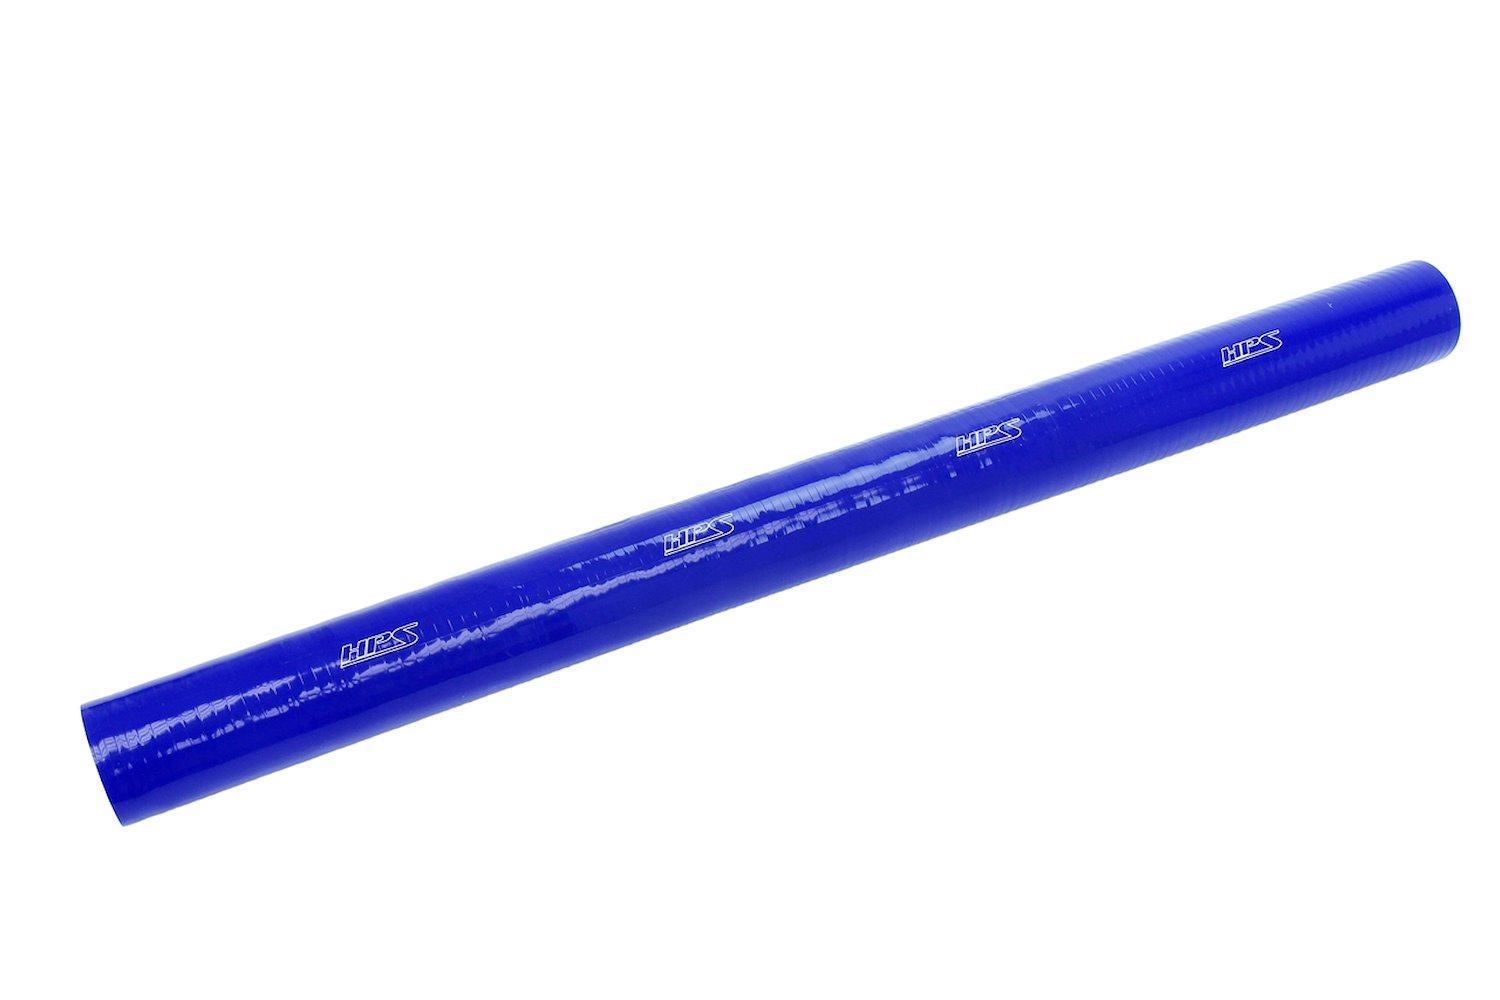 HTST-3F-500-BLUE Silicone Coolant Tube, High-Temp 4-Ply Reinforced, 5 in. ID, 3 ft. Long, Blue